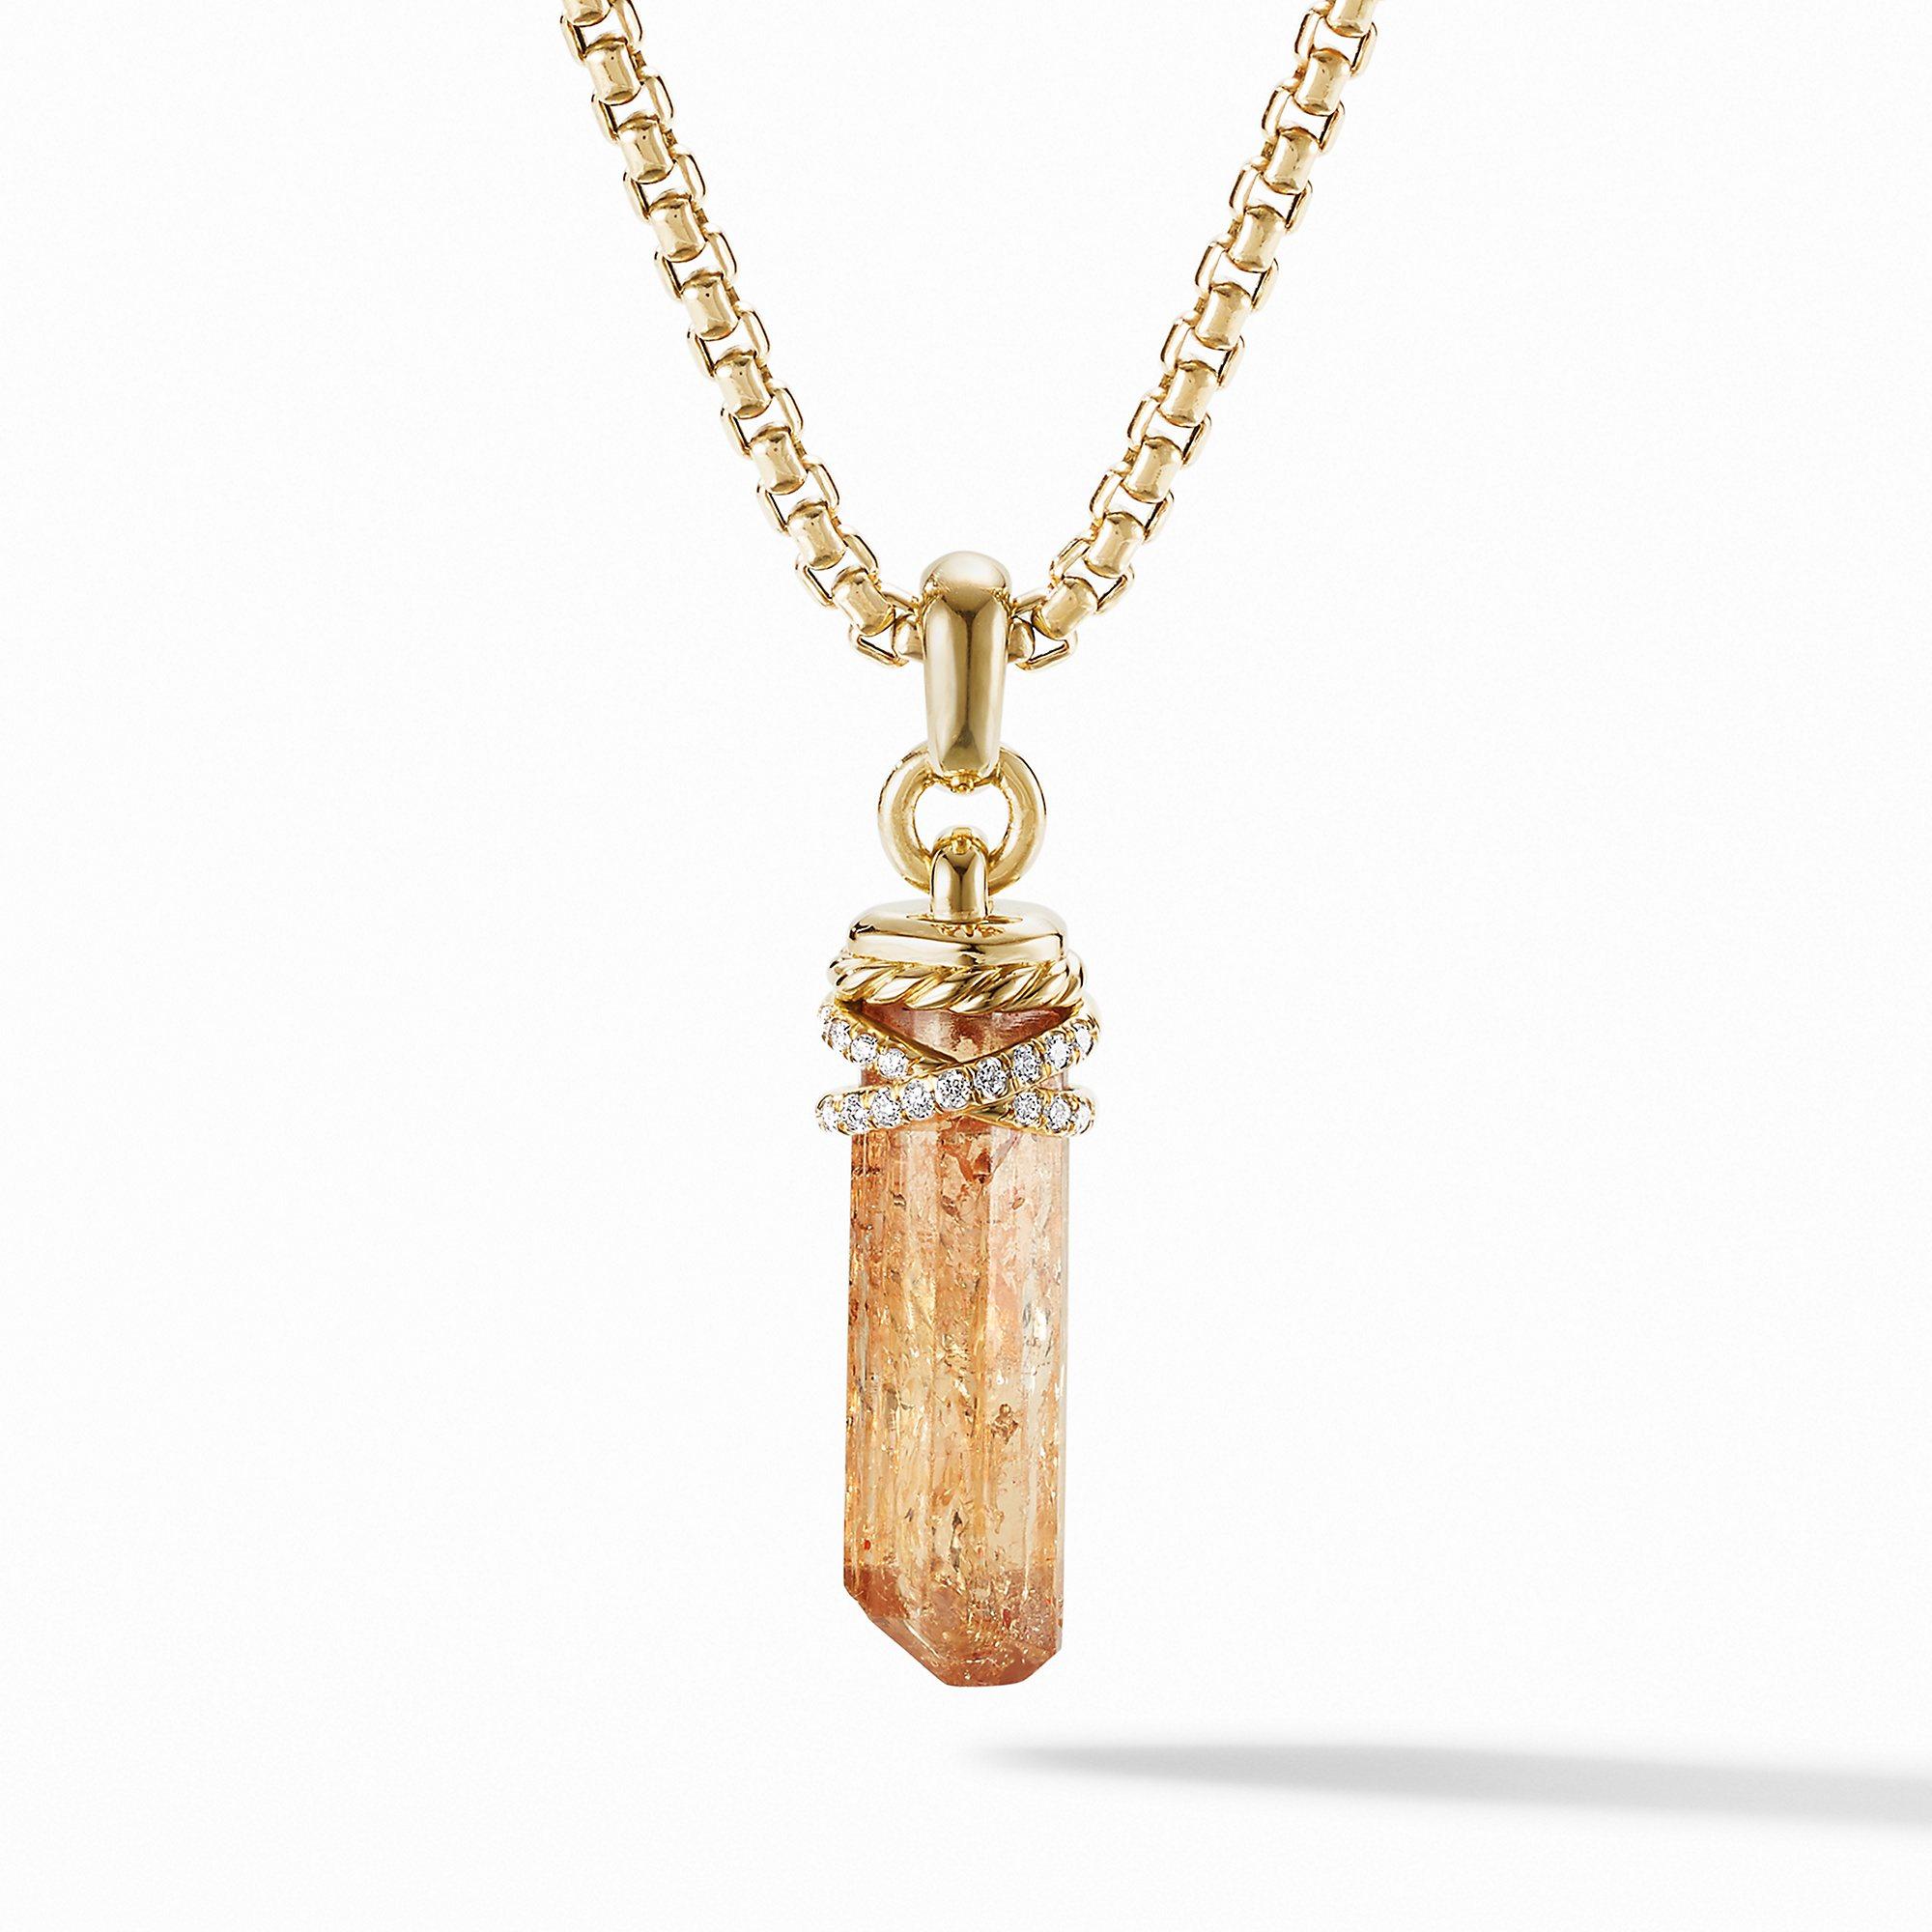 David Yurman Crystal Wrapped Amulet with Imperial Topaz, 18K Yellow Gold and Pave Diamonds | Front View